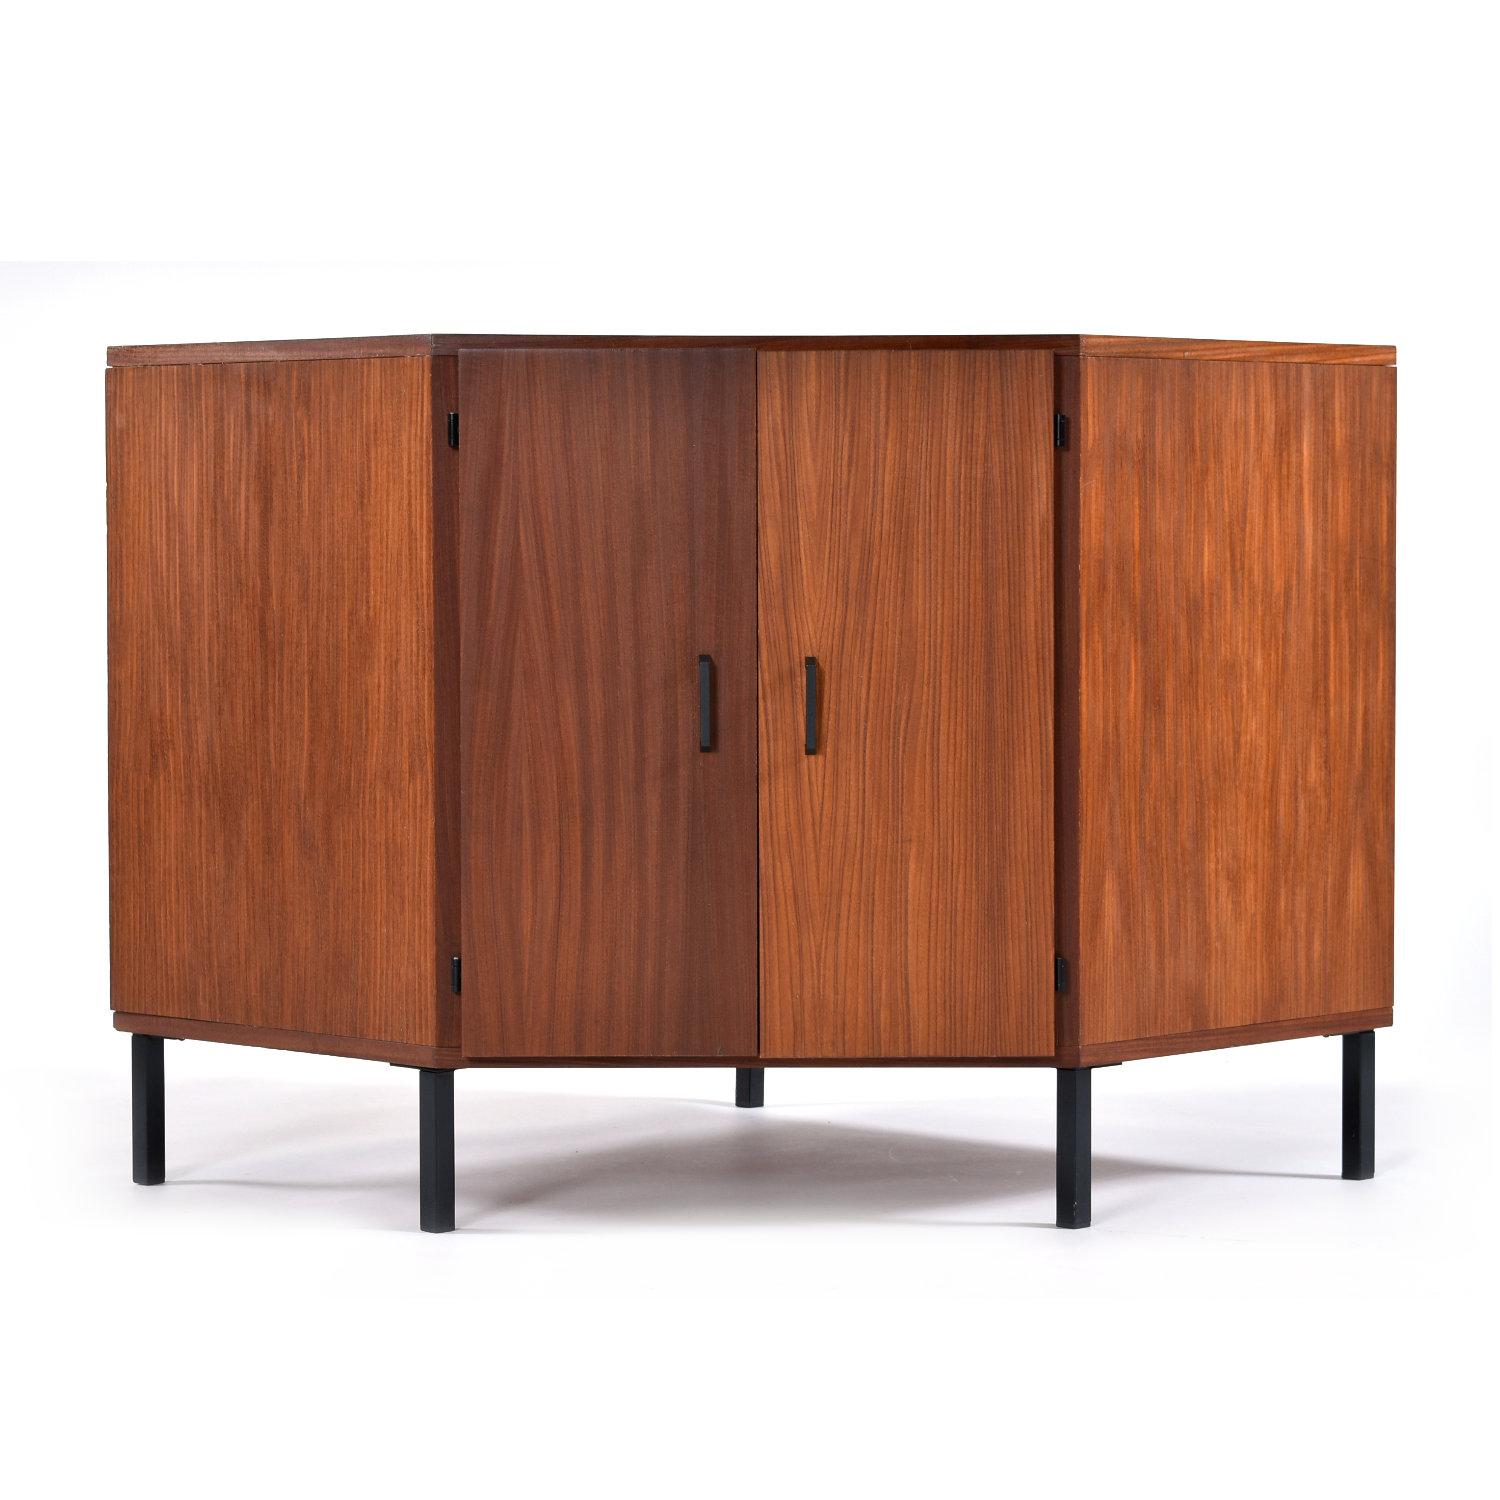 Incredibly unique Mid-Century Modern corner media cabinet. This piece is a real outlier. The cabinet deviates from peers of its vintage, 1950s / 1960s. It’s minimalist design and exotic hard wood construction suggests Scandinavian origins, however